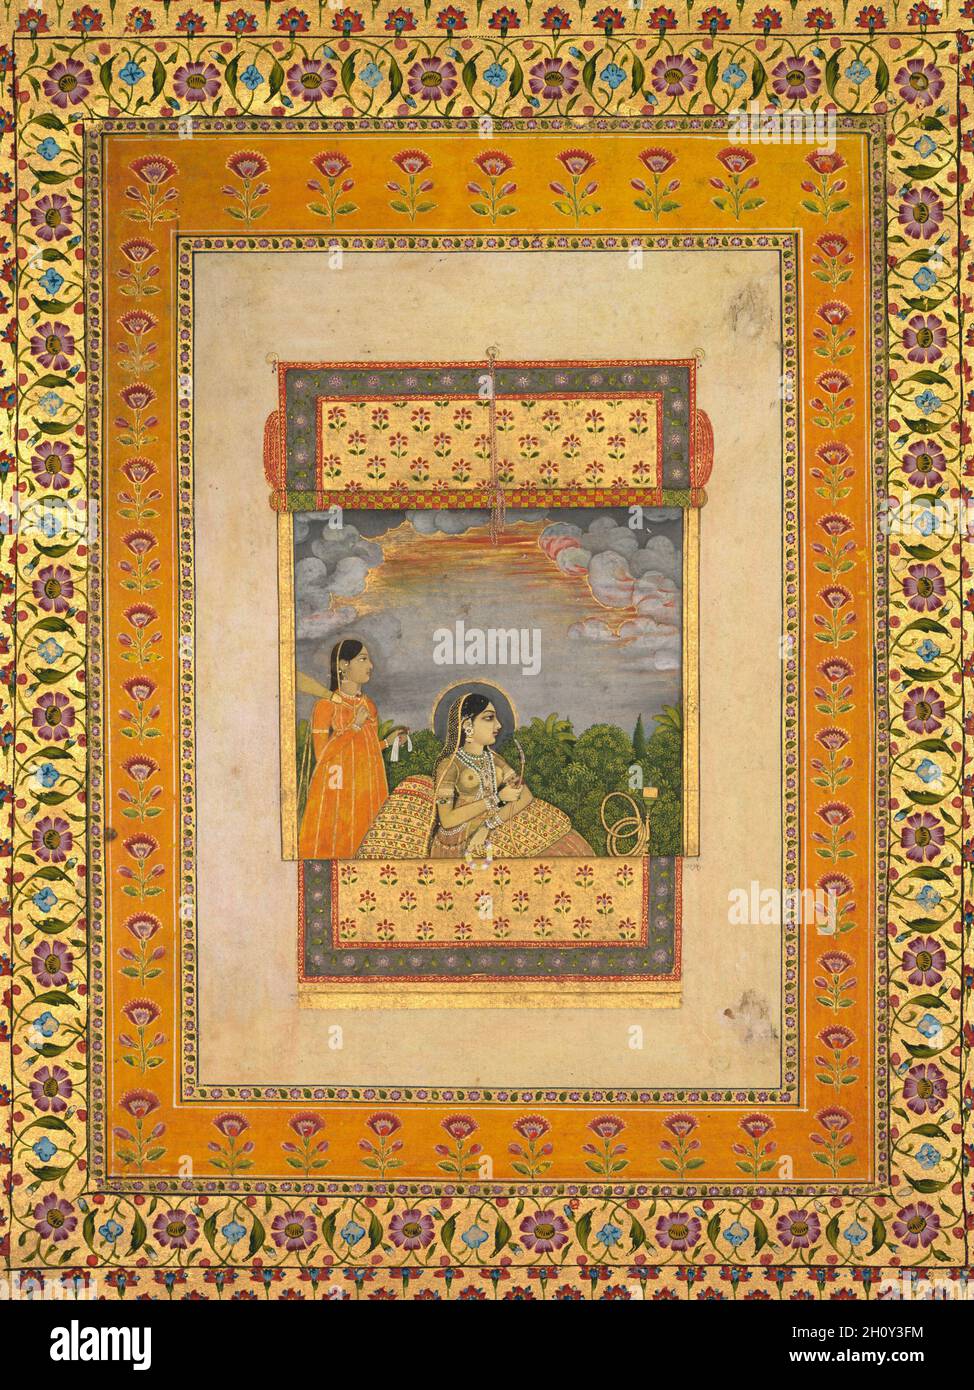 Princess and attendant in trompe l’oeil window, c. 1765. Aqil Khan (Indian, active mid-1700s). Opaque watercolor and gold on paper; image: 12.5 x 7.8 cm (4 15/16 x 3 1/16 in.); overall: 44 x 31.6 cm (17 5/16 x 12 7/16 in.).  Although unidentifiable by inscription or individualized portrait features, the seated figure can be recognized as a powerful royal woman, the model for whom might be the mother or wife of Muhammad Shah, the last Mughal emperor able to fully support the arts at the imperial court. The halo of light comes from the sky, indicating divine light behind her, rather than being g Stock Photo